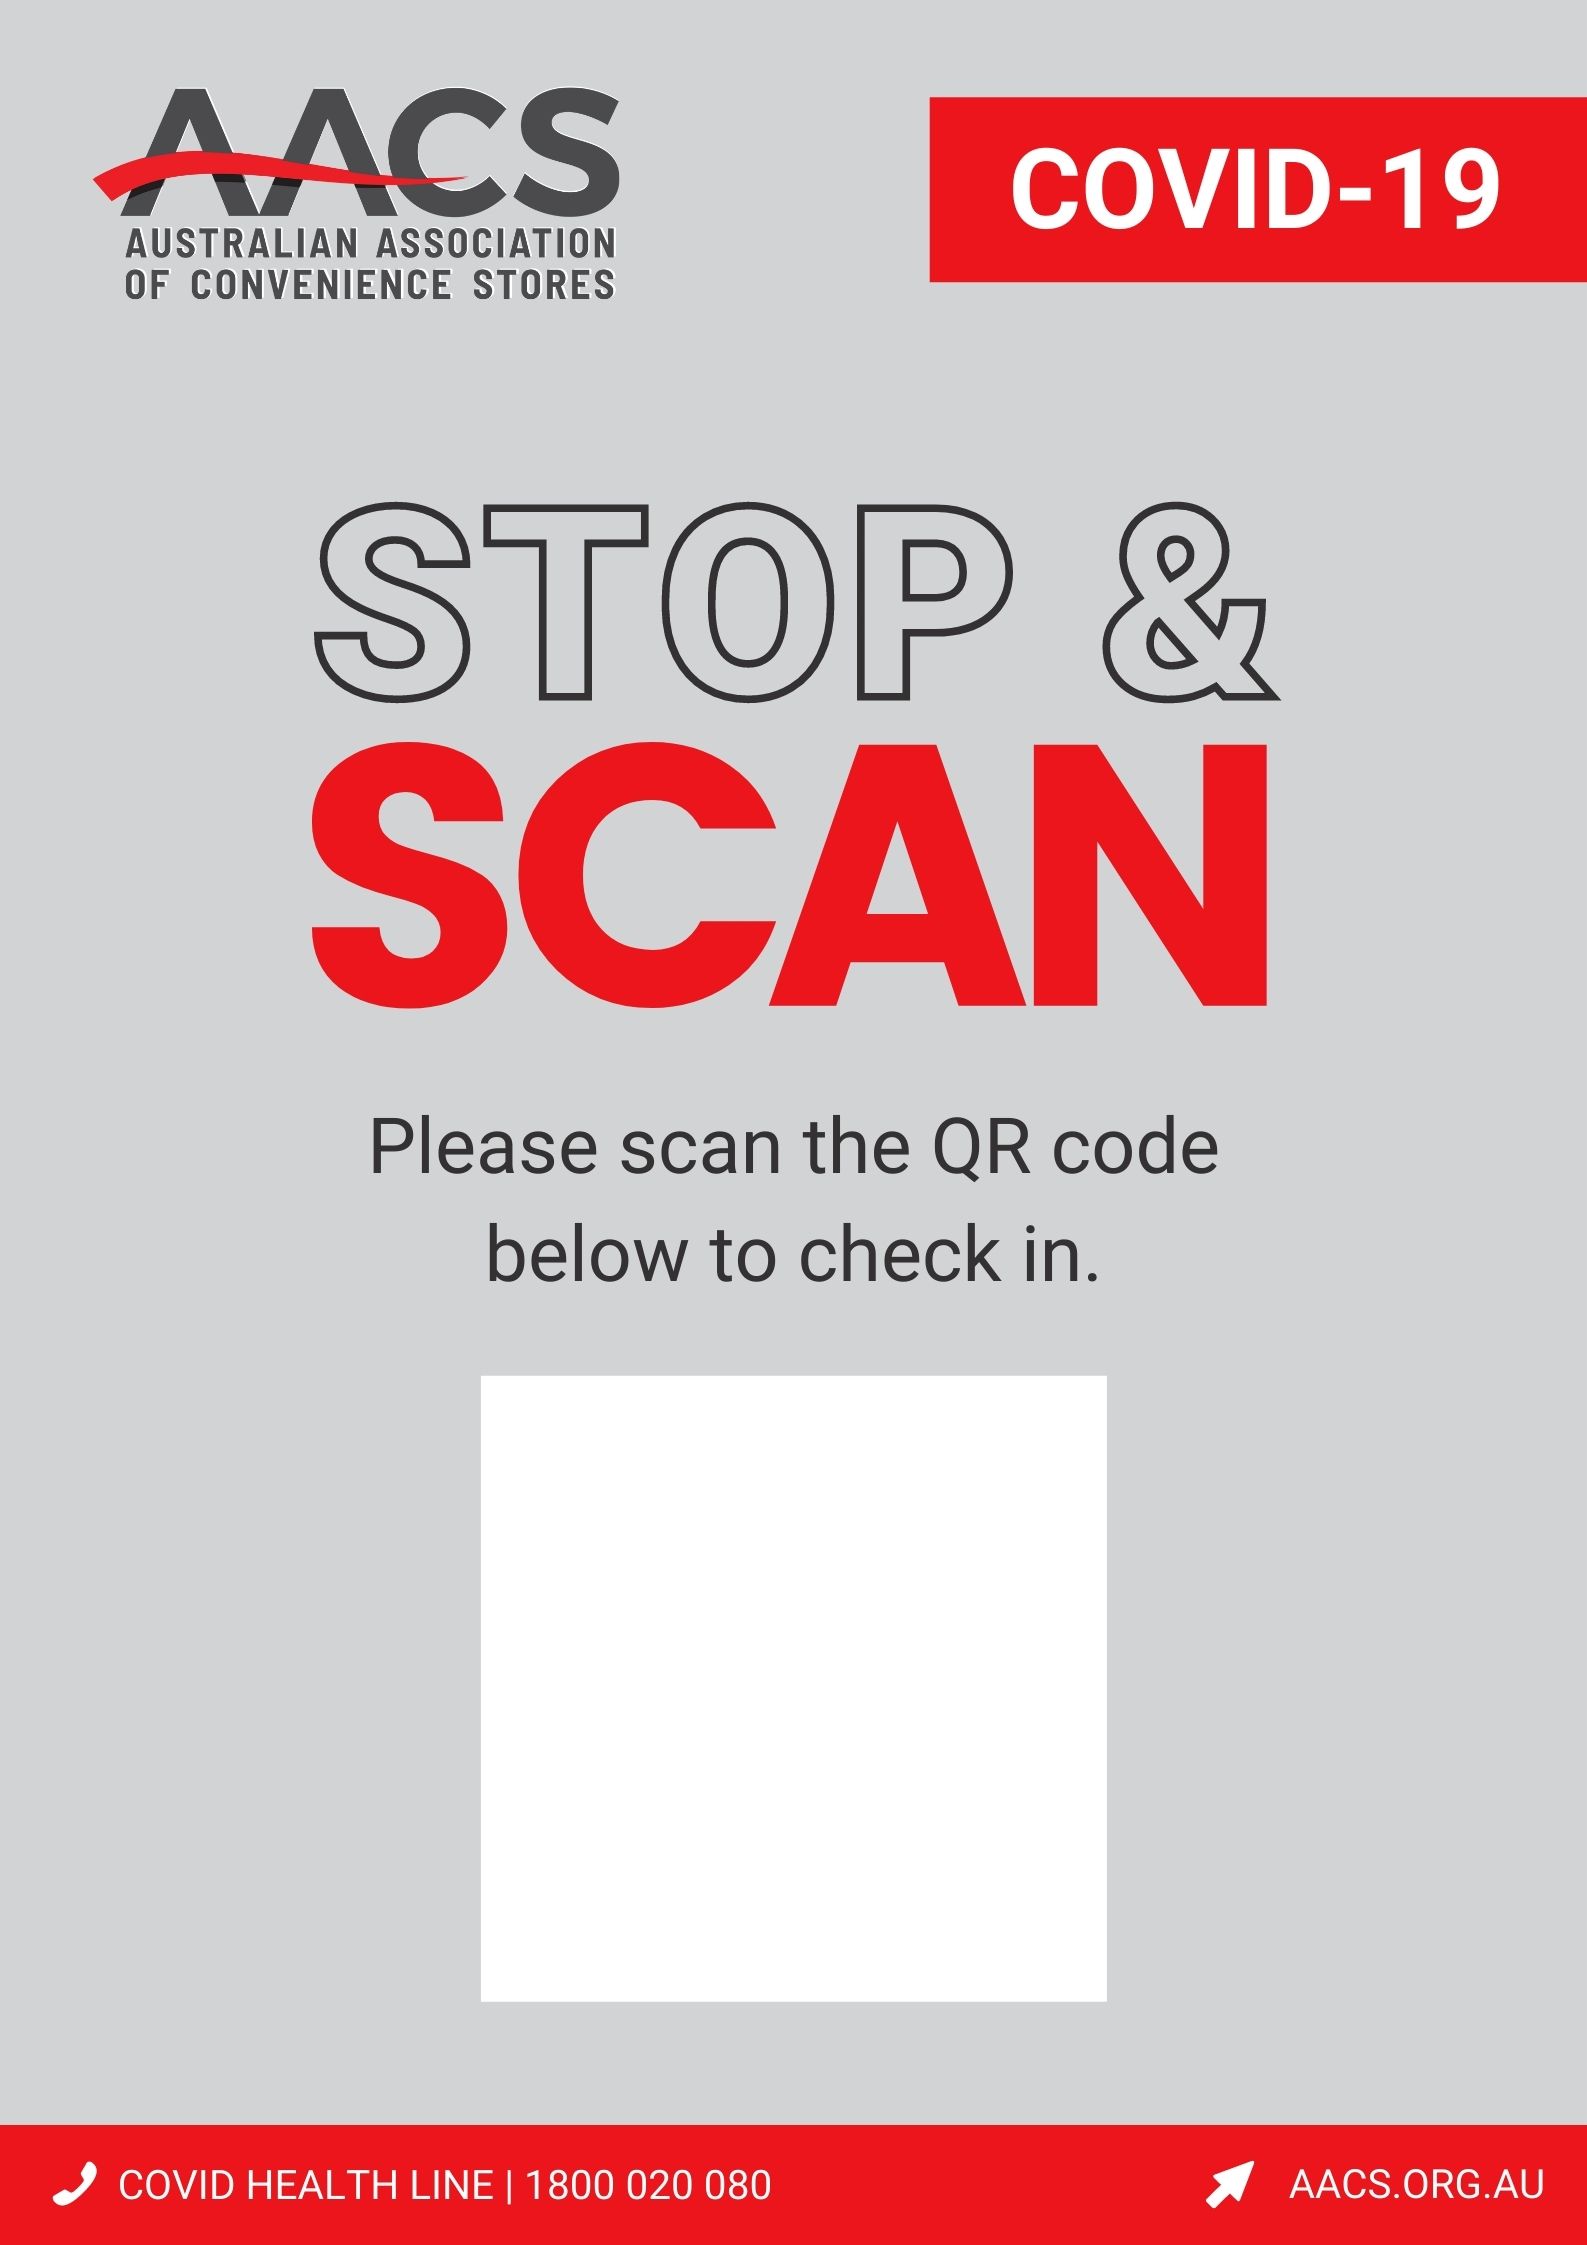 AACS_COVID-19 posters_Stop & Scan